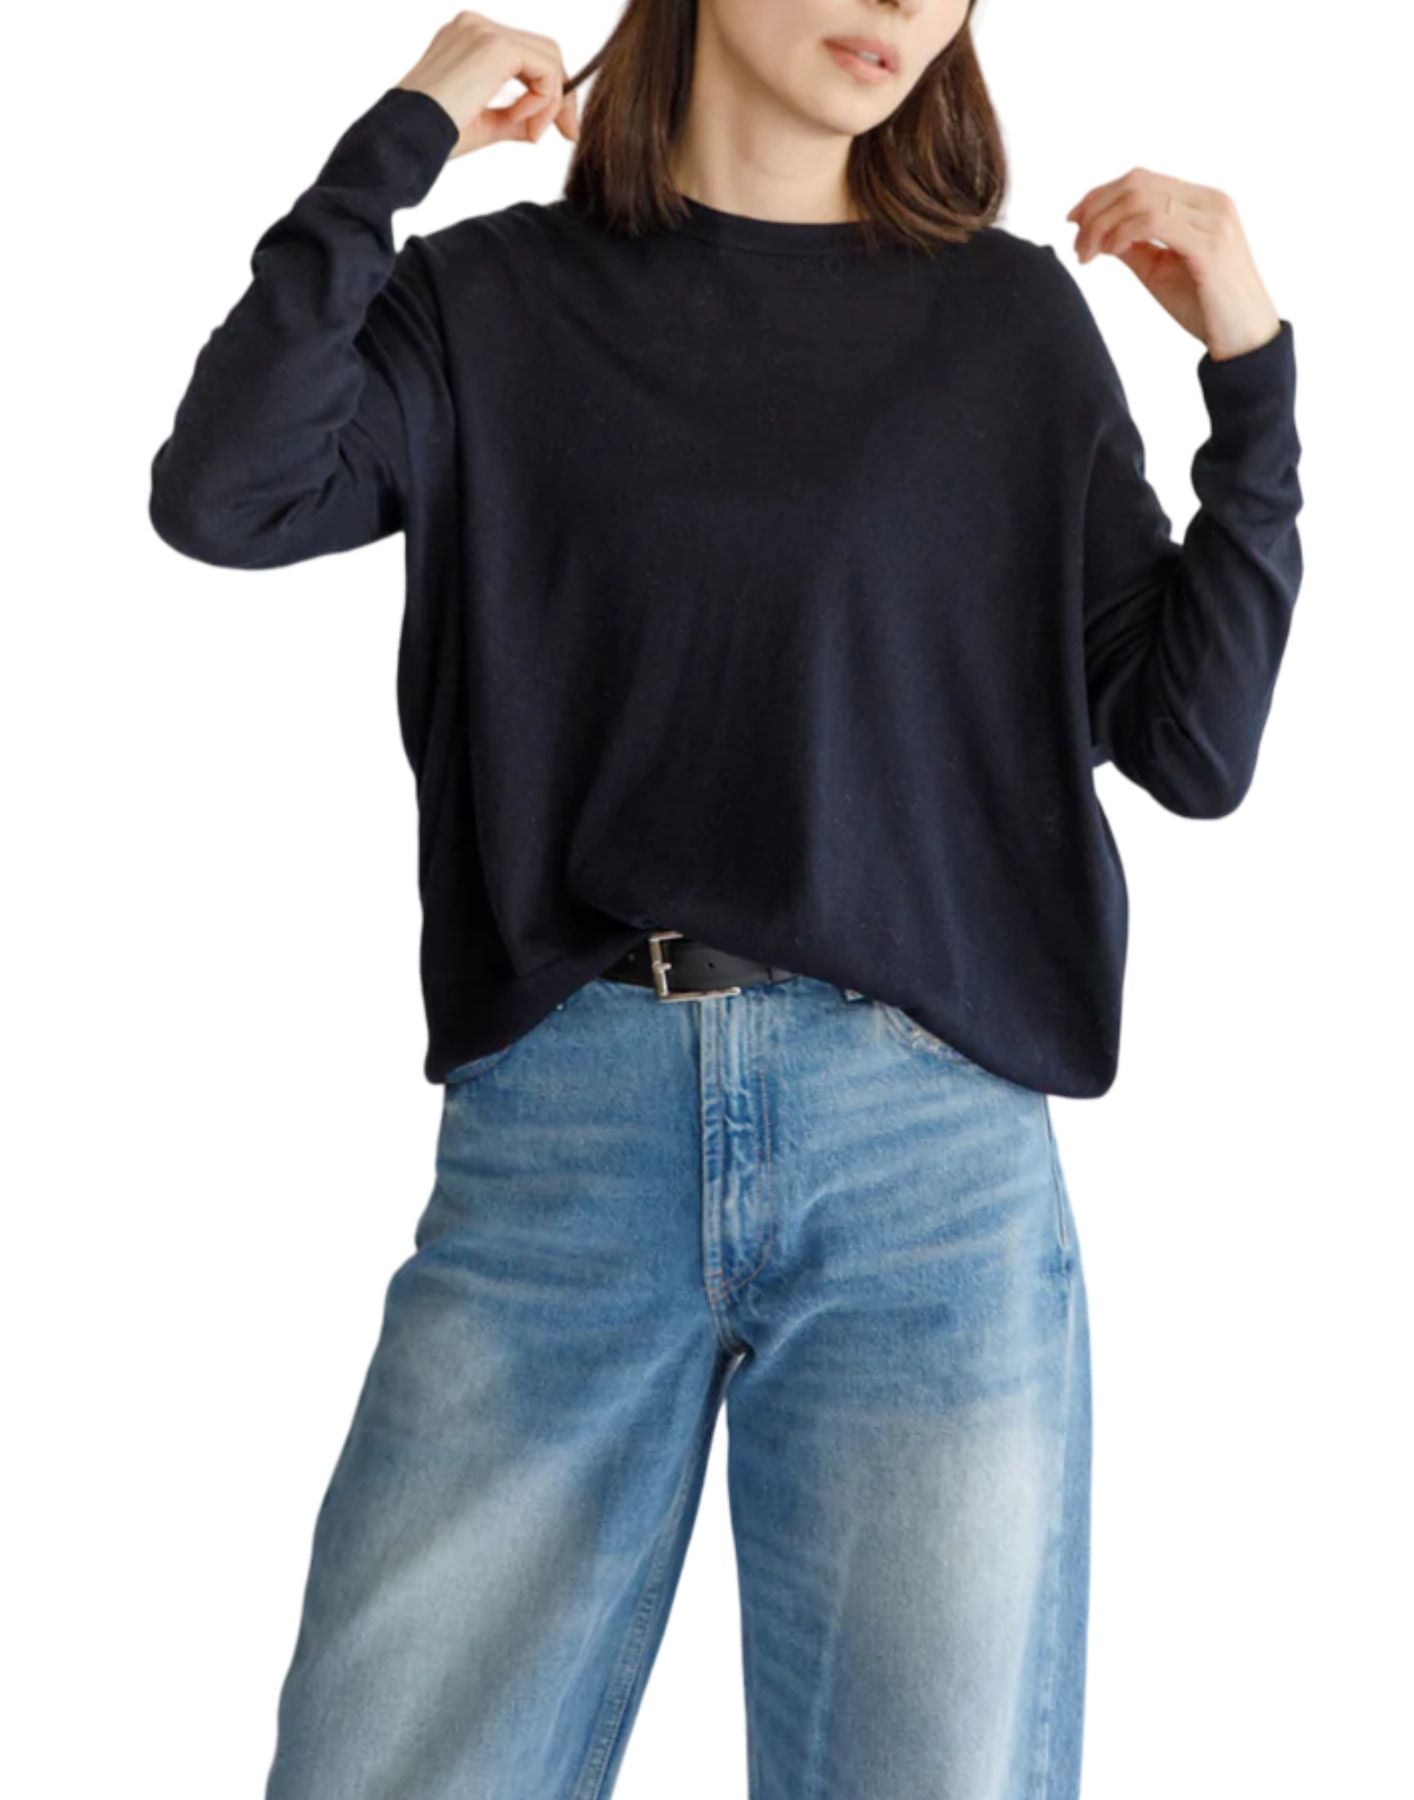 Sweater for woman CT24116 BLACK NAVY C.T. plage